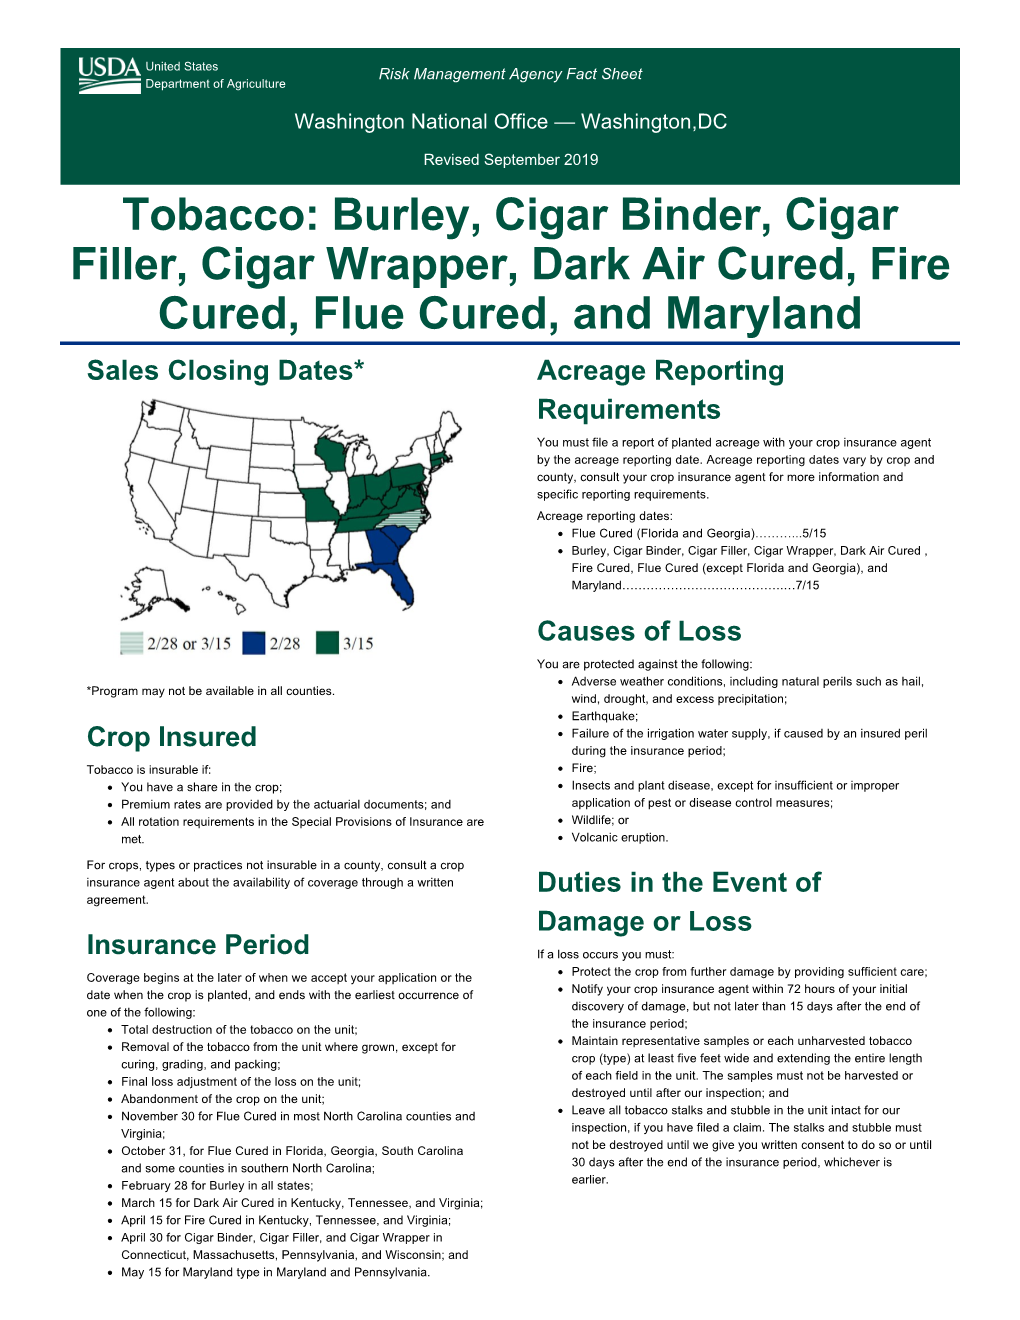 Tobacco: Burley, Cigar Binder, Cigar Filler, Cigar Wrapper, Dark Air Cured, Fire Cured, Flue Cured, and Maryland Sales Closing Dates* Acreage Reporting Requirements